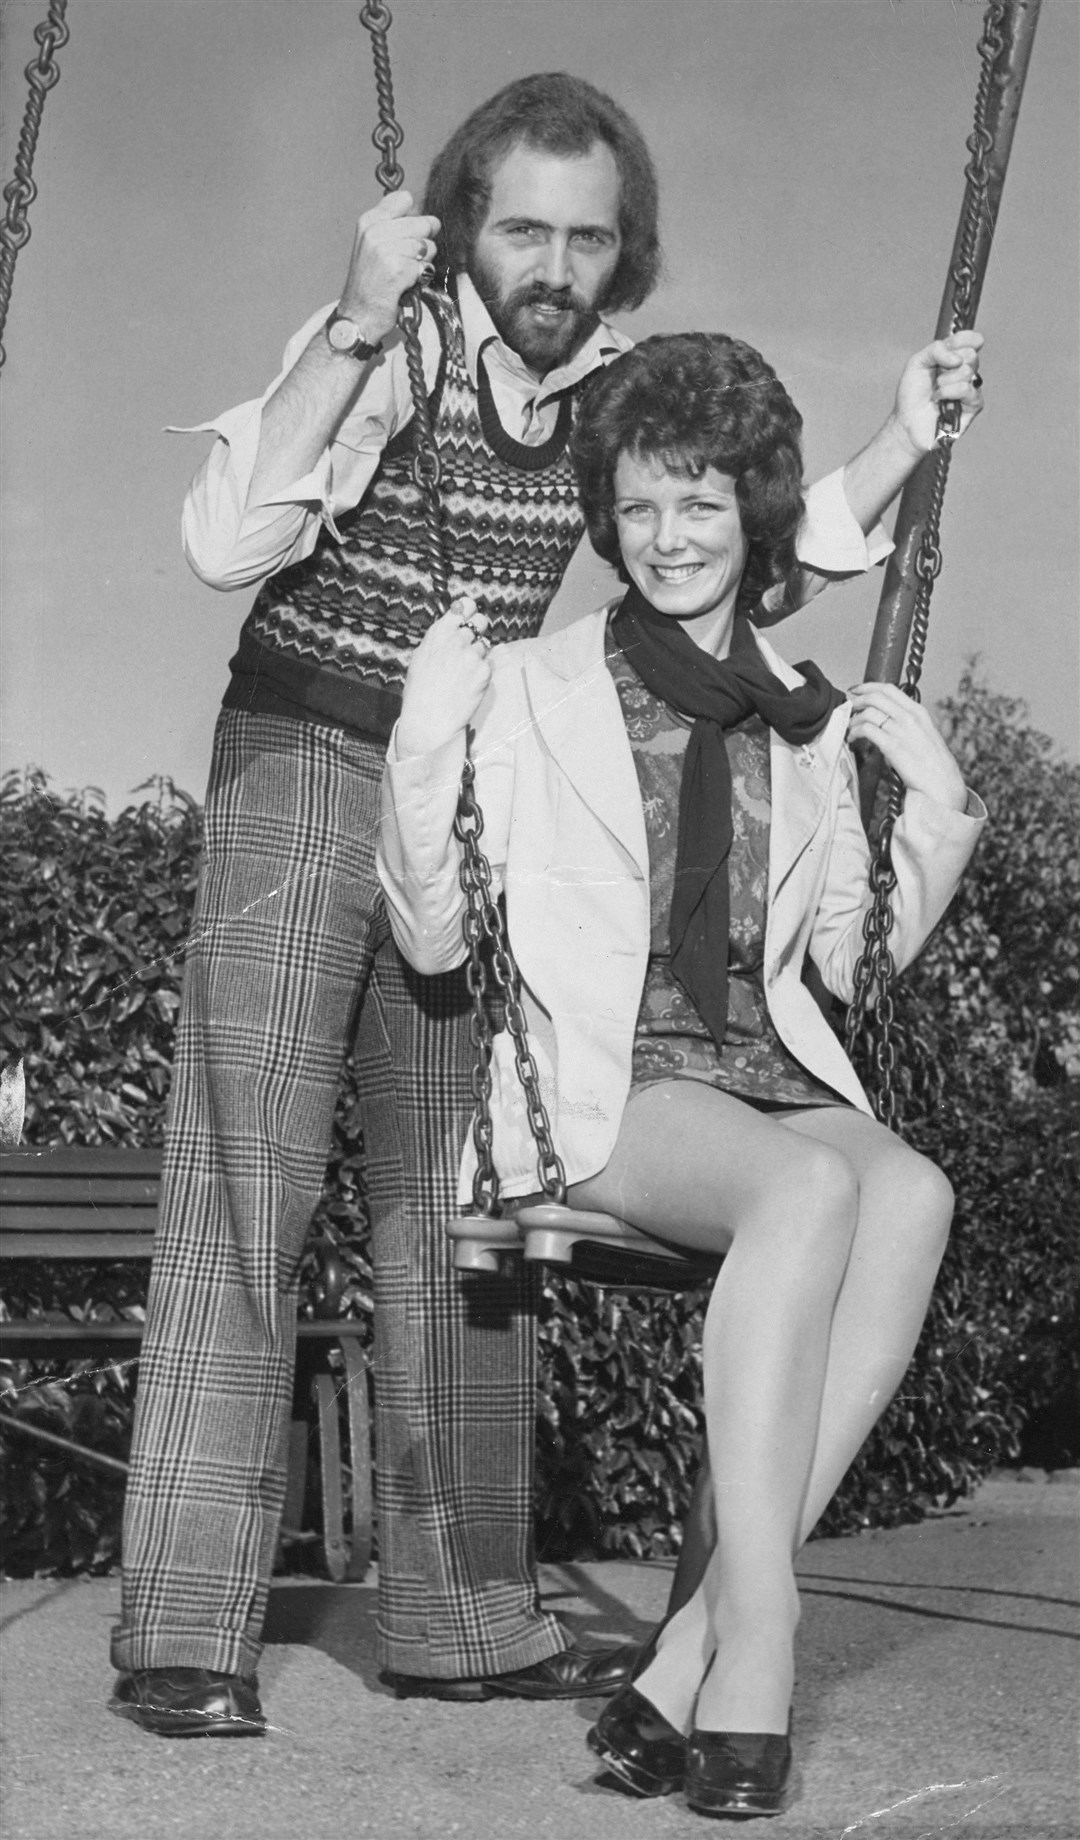 Kenneth and Shirley in 1972.